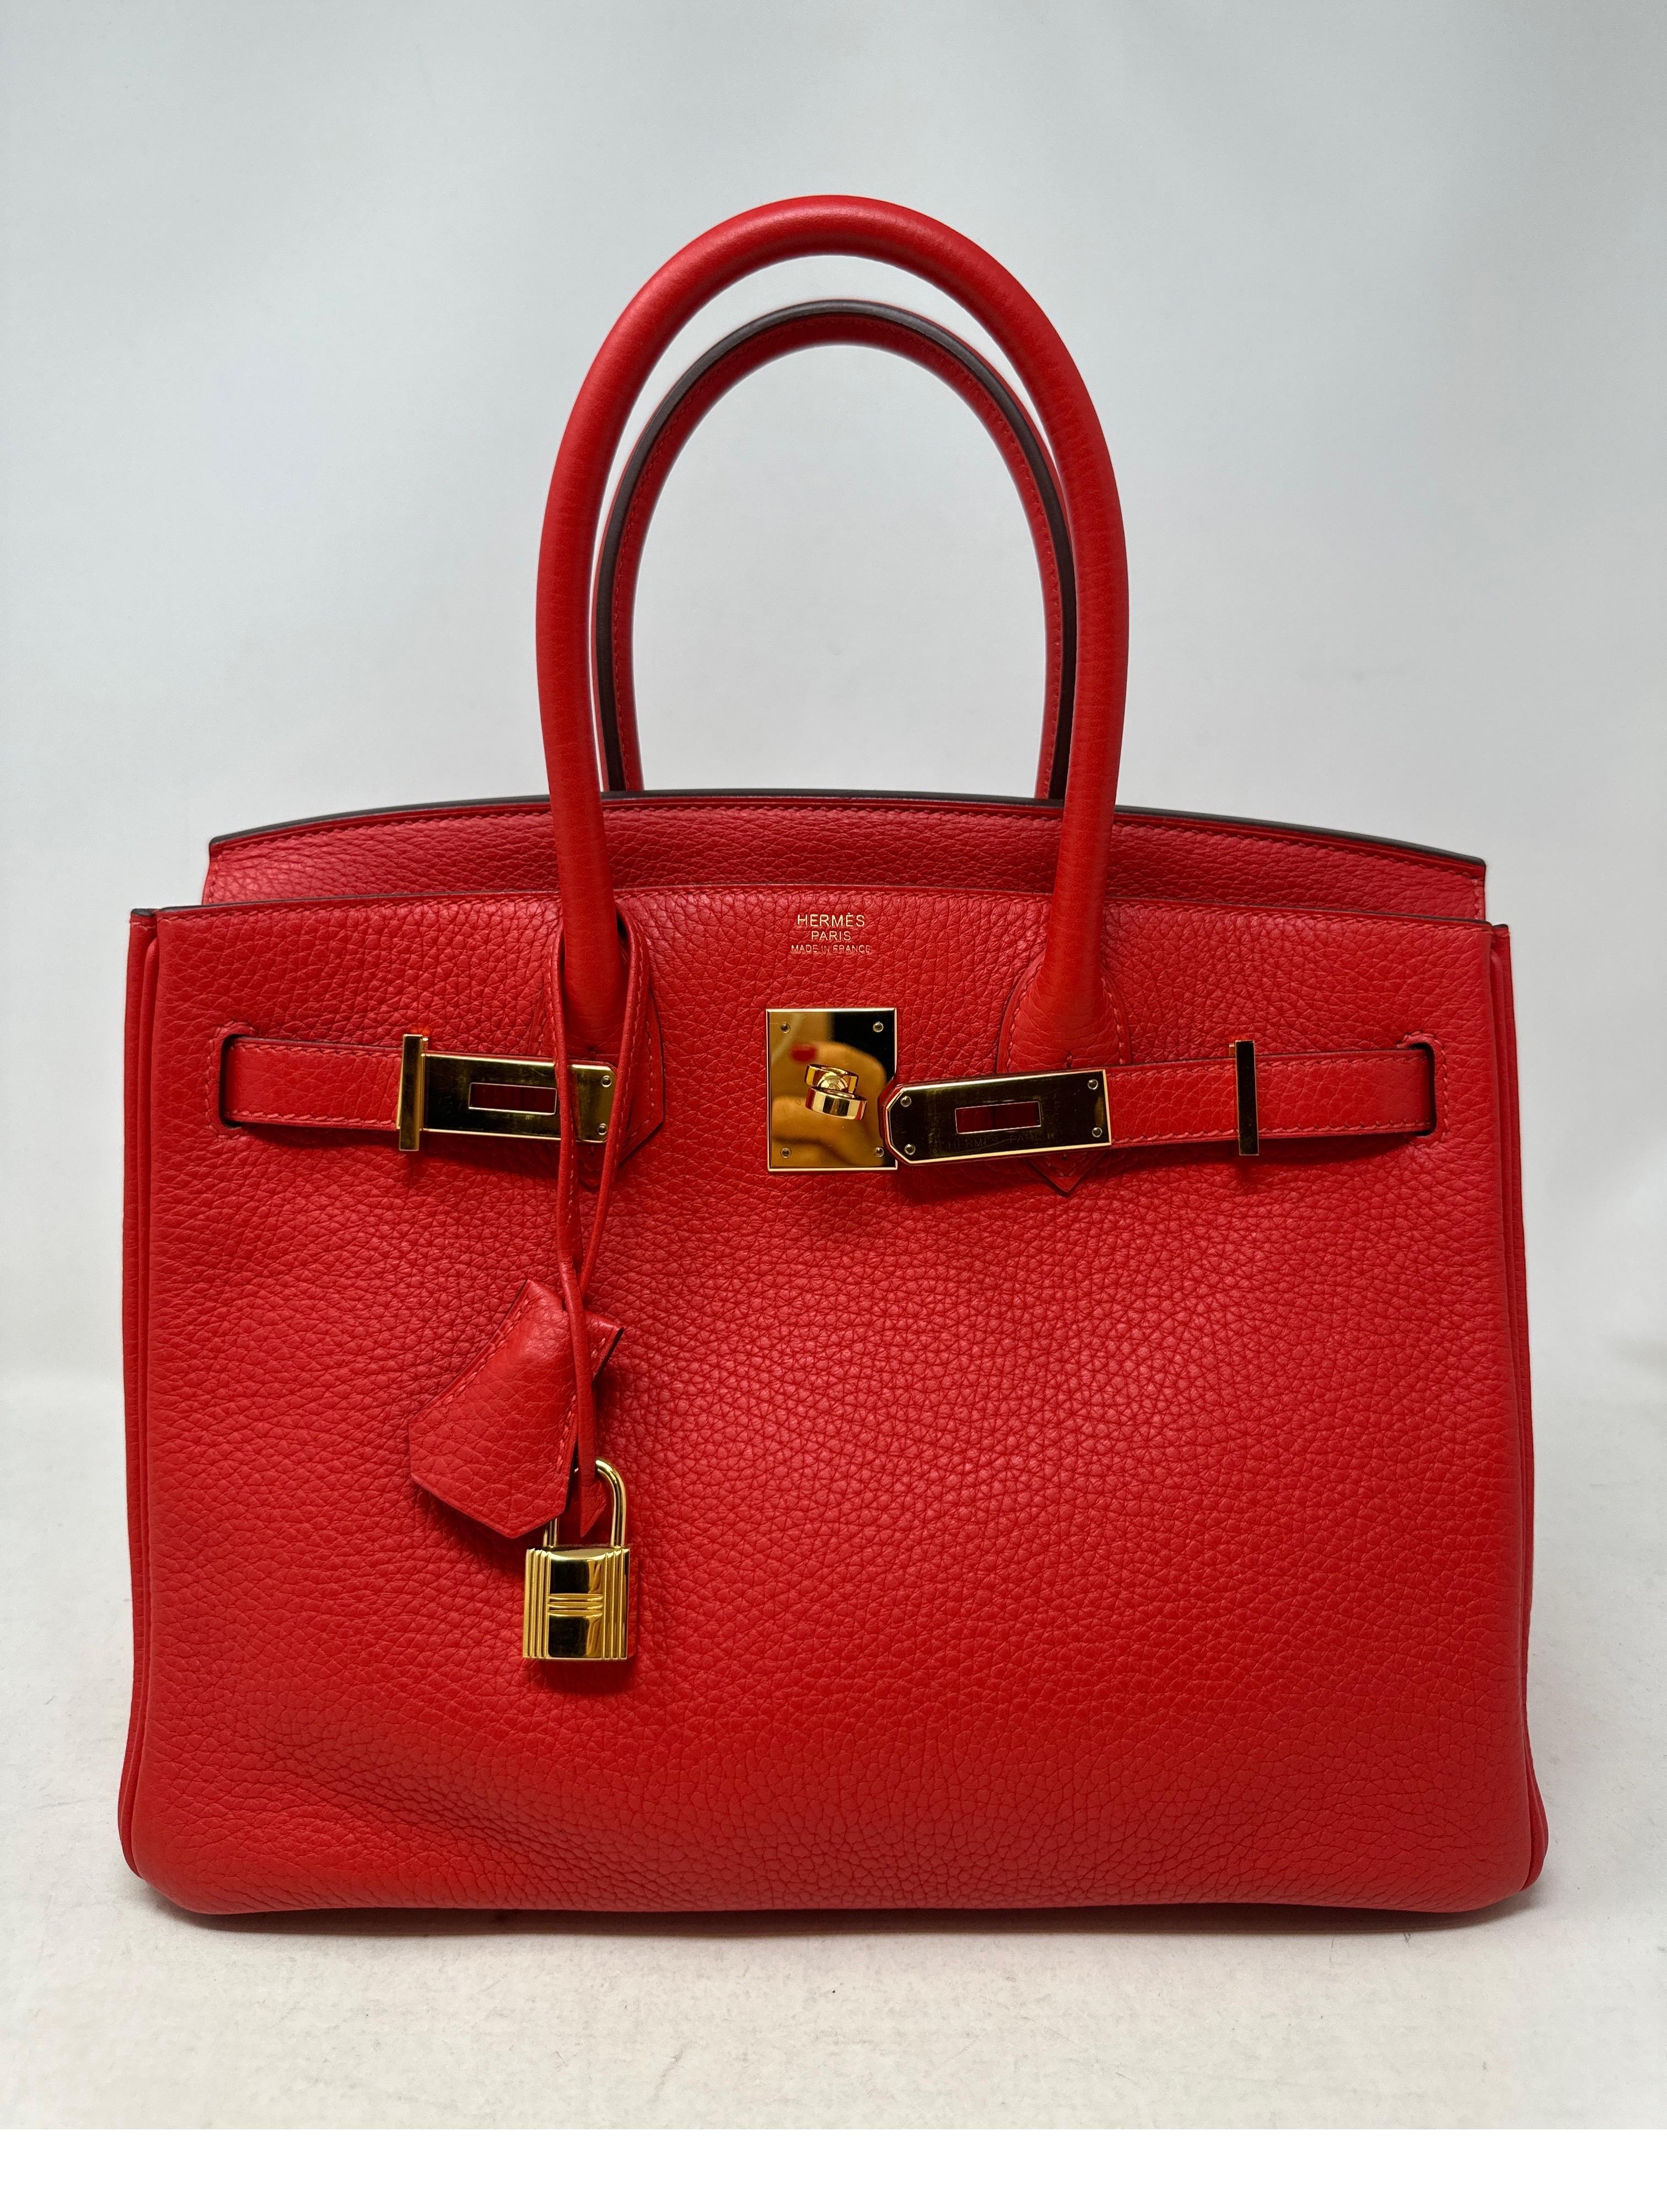 Hermes Rouge Tomate Red Birkin 30 Bag. Excellent condition. Like new. Gold hardware. Togo leather. Interior clean. Beautiful tomato red clor. Most wanted size and rare color. 